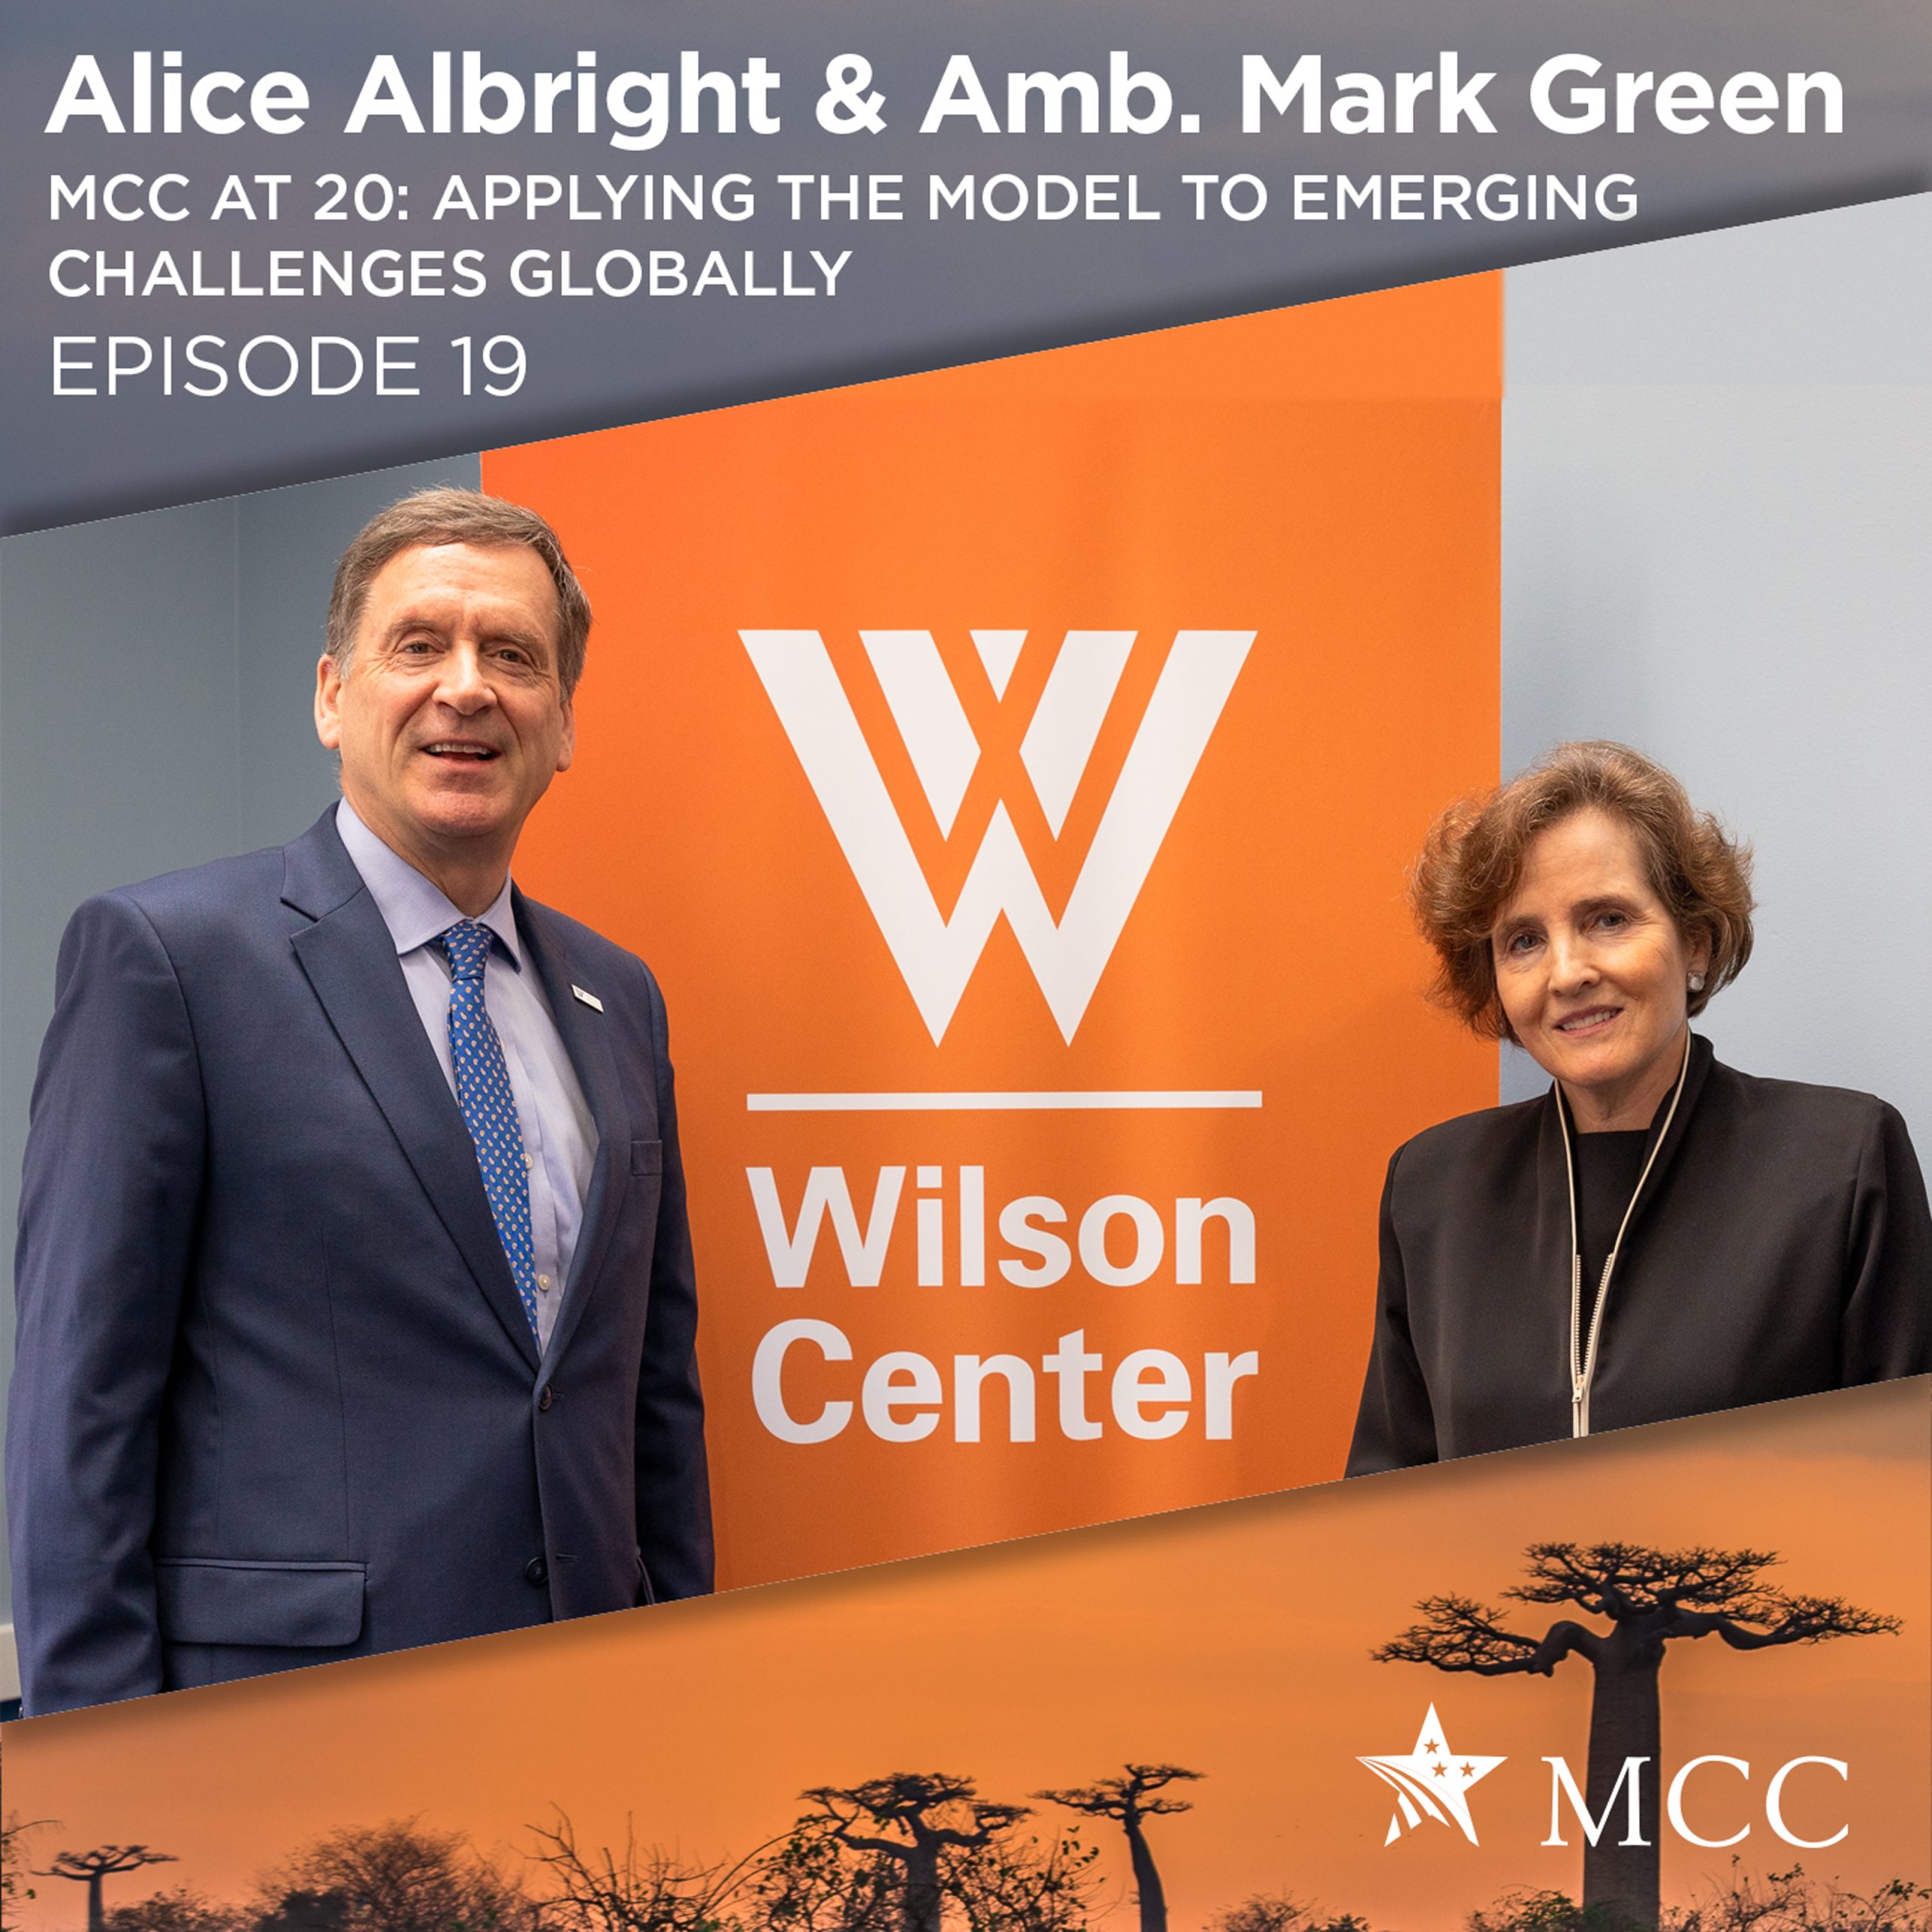 MCC at 20: Applying the Model to Emerging Challenges Globally